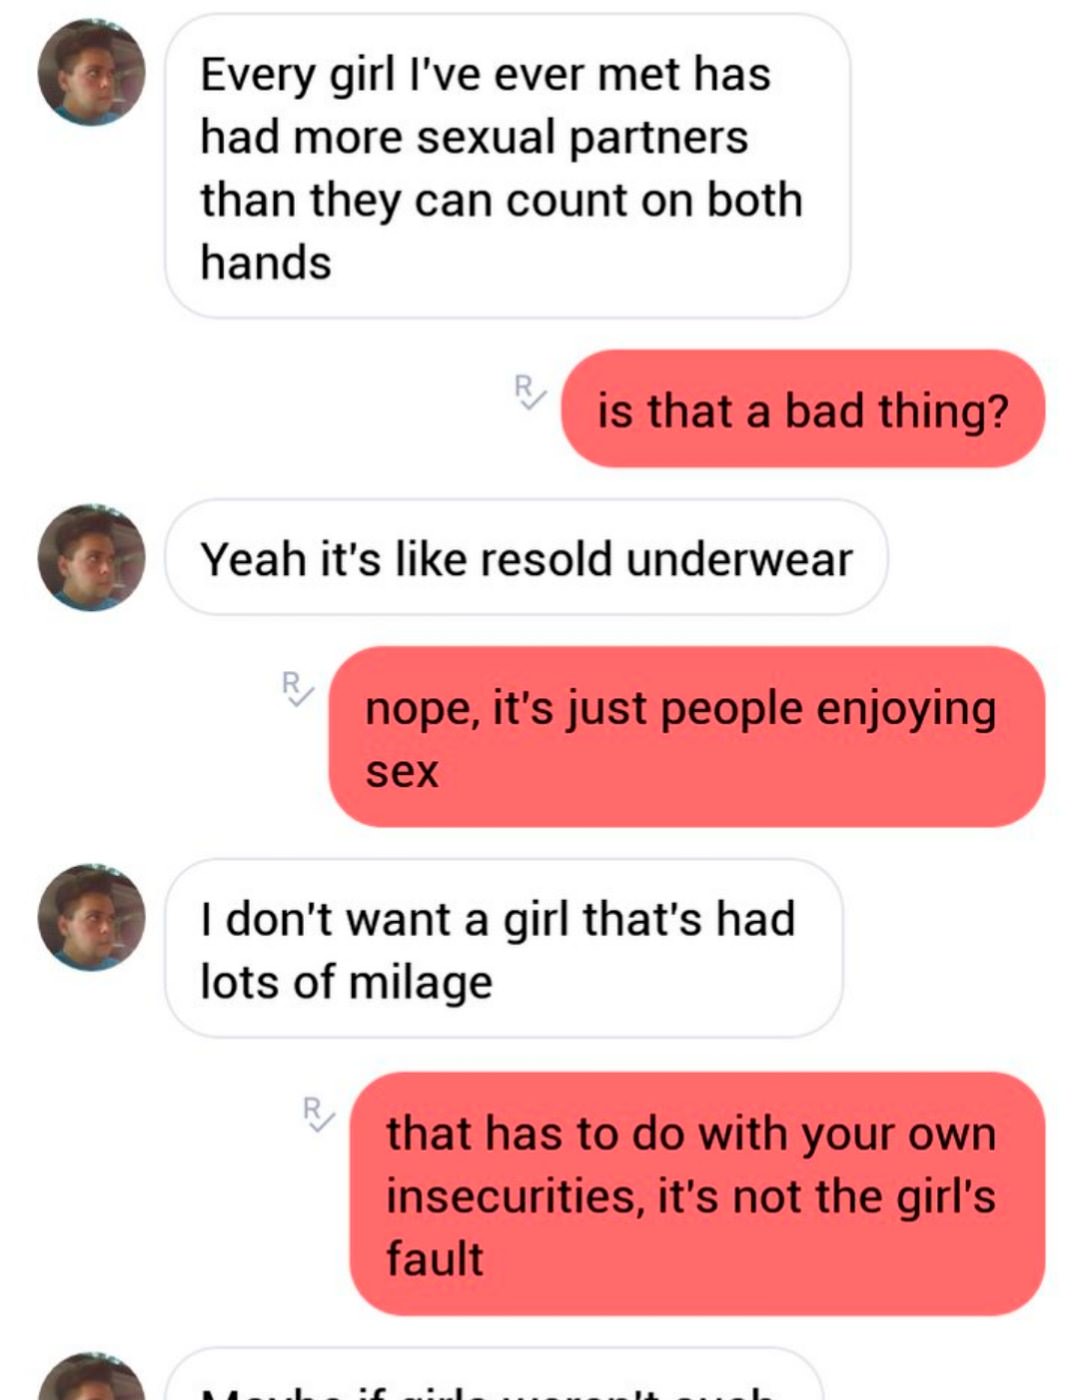 Every girl I've ever met has had more sexual partners than they can count on both hands is that a bad thing? Yeah it's resold underwear nope, it's just people enjoying sex I don't want a girl that's had lots of milage that has to do with your own…